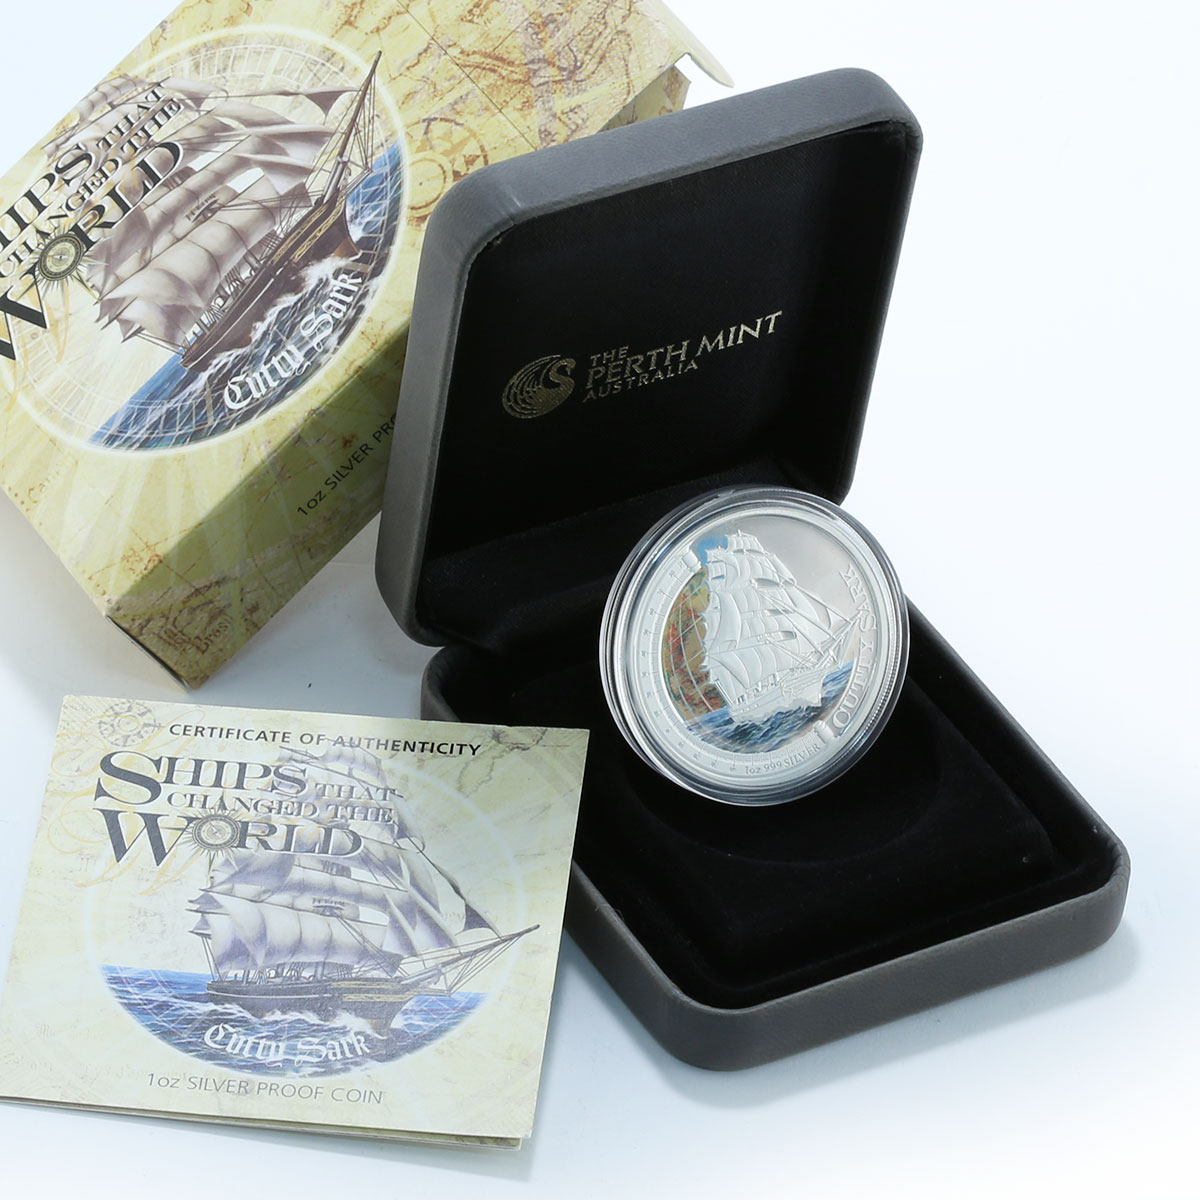 Tuvalu 1 Dollar Ship Cutty Sark silver proof colorized coin 2012